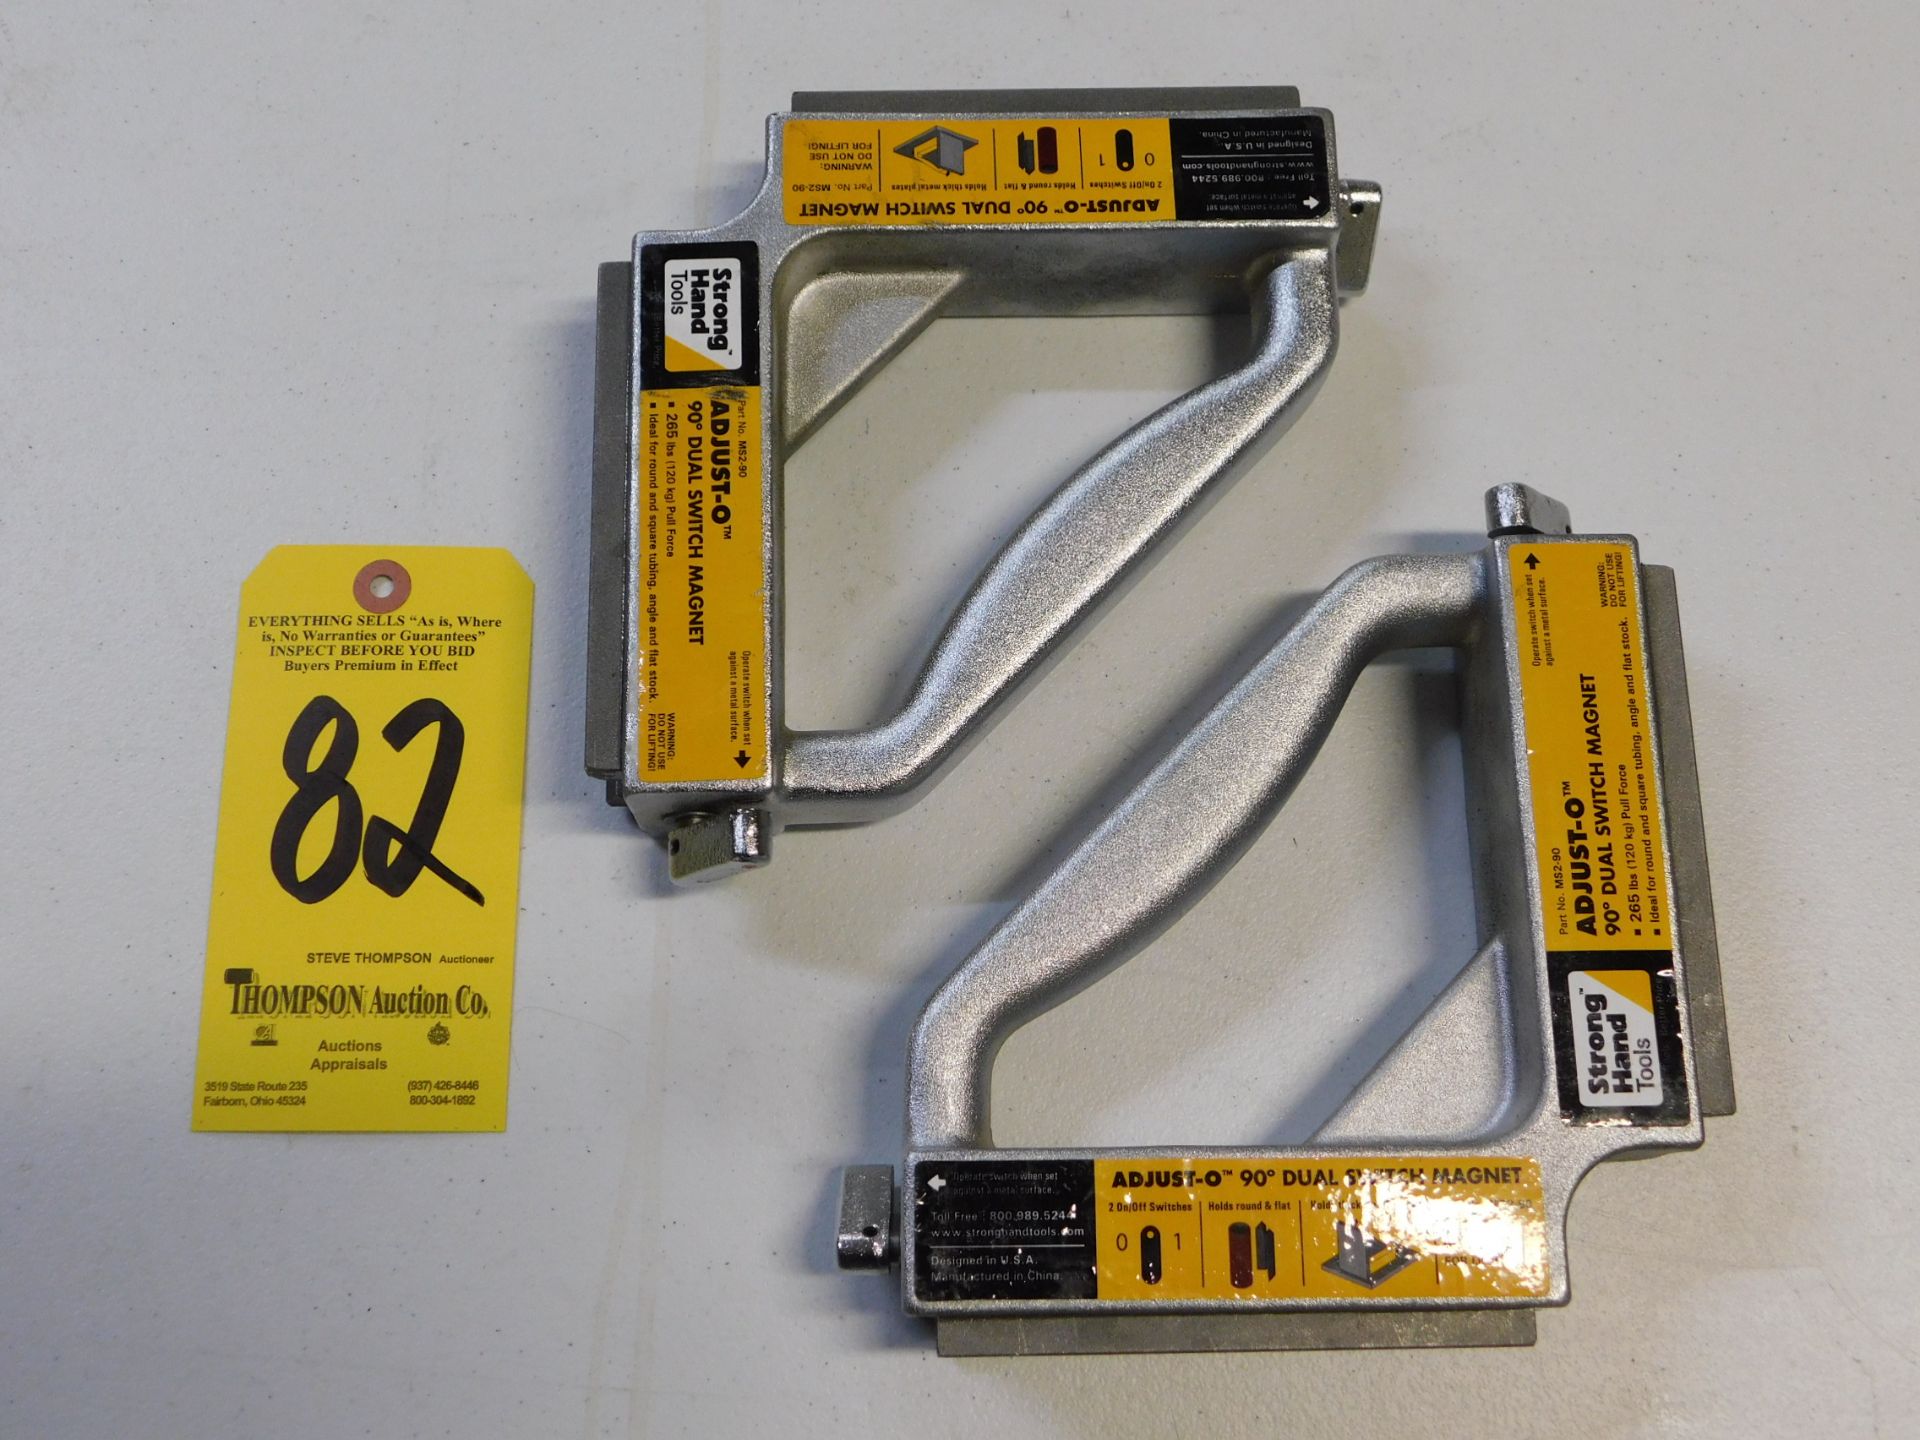 (2) Strong Hand Adjusto 90 Degree Dual Switch Magnets, Lot Location 3204 Olympia Dr. A, Lafayette,